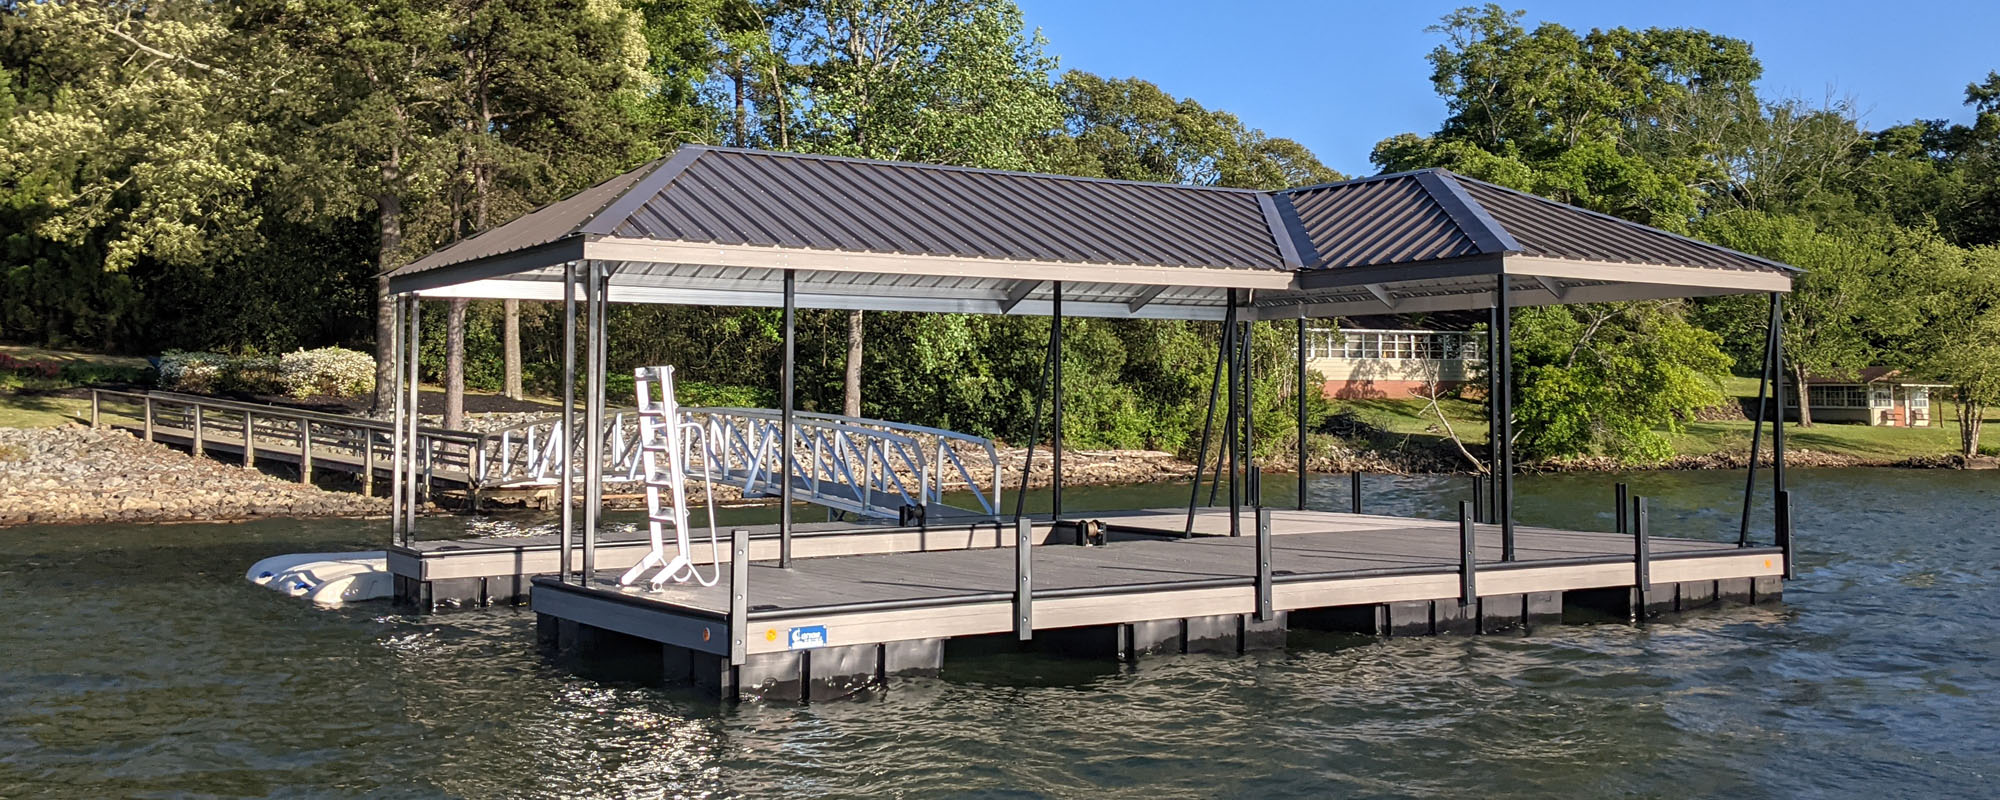 Custom Dock Systems Dock Repair and Restoration of Marine Aluminum and Steel Docks on Lake Hartwell in Anderson, SC